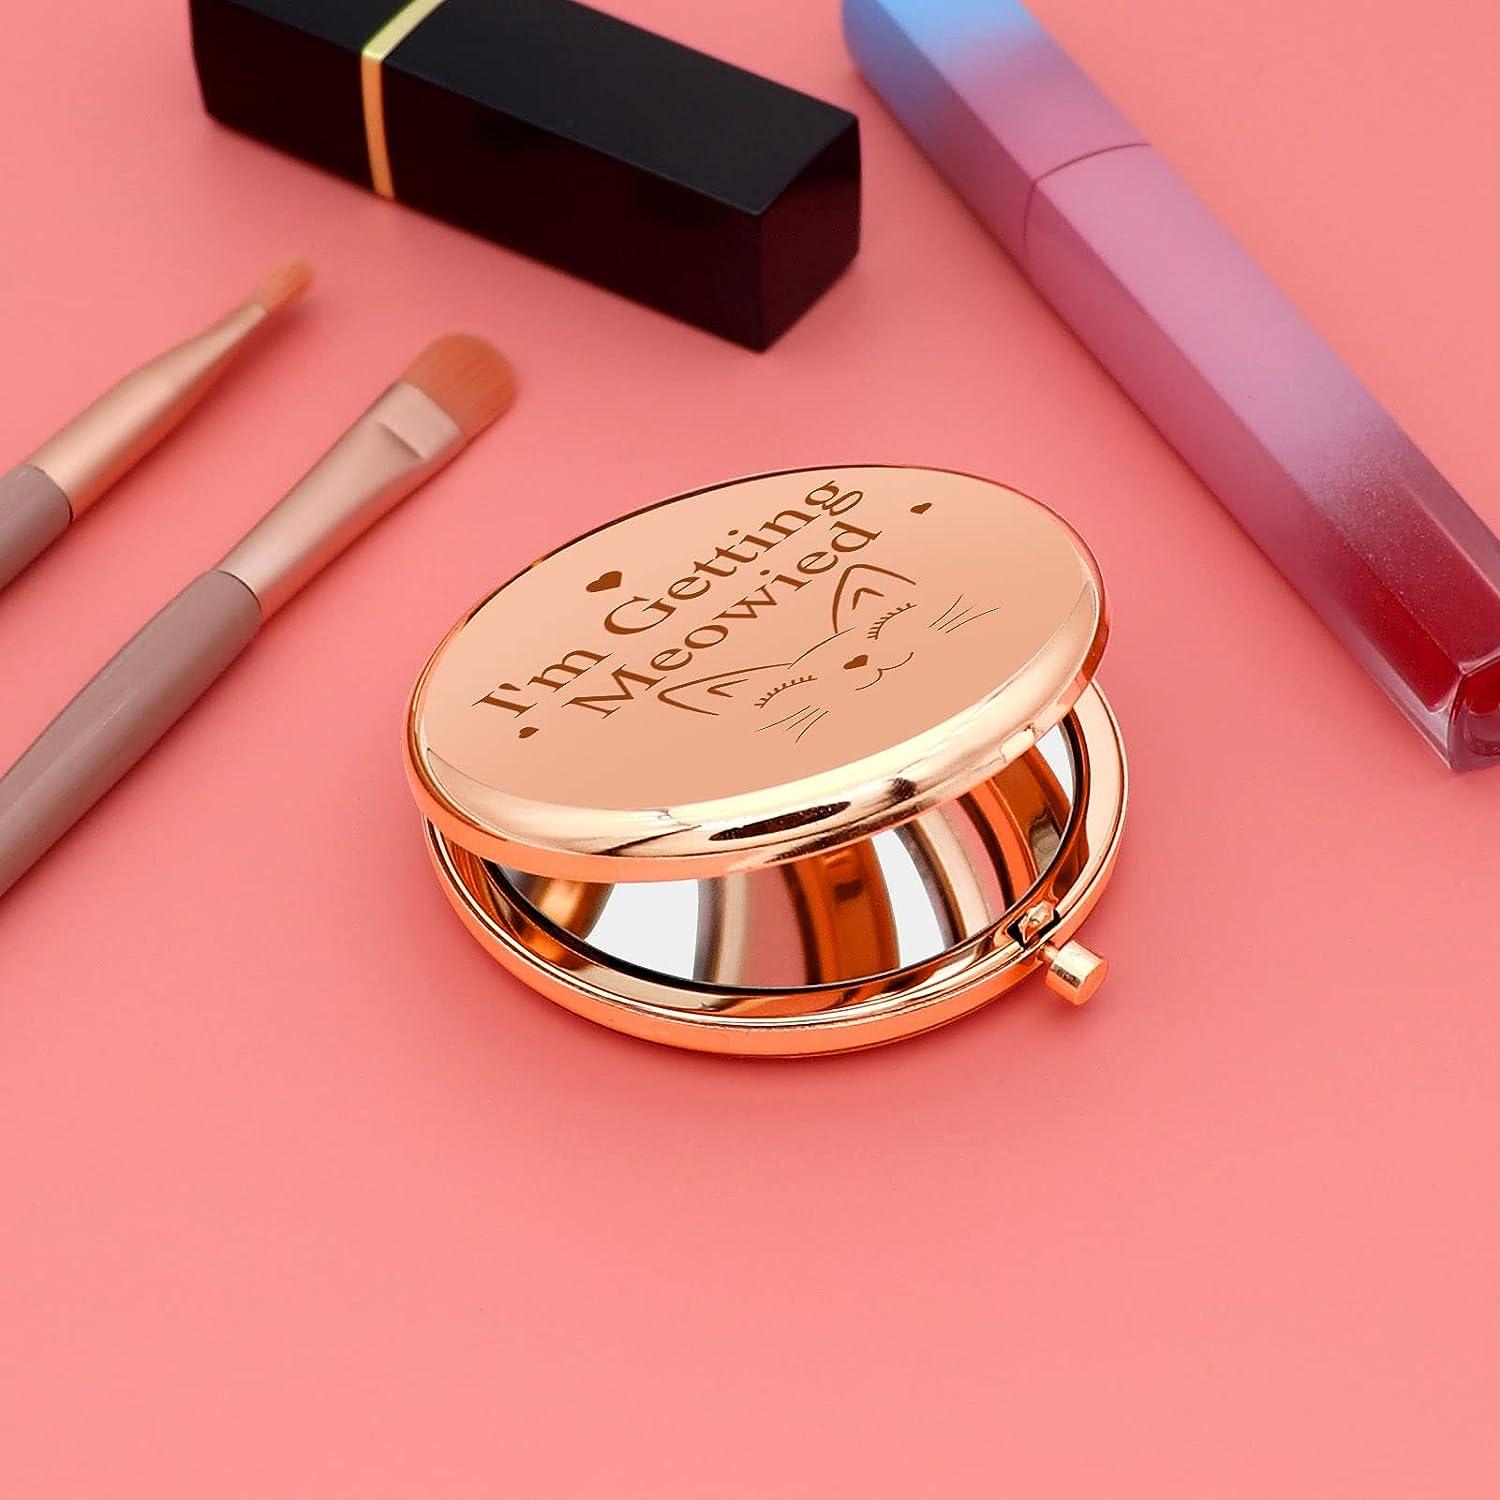 The 51 Best Gifts for Makeup Lovers, Tested by Us